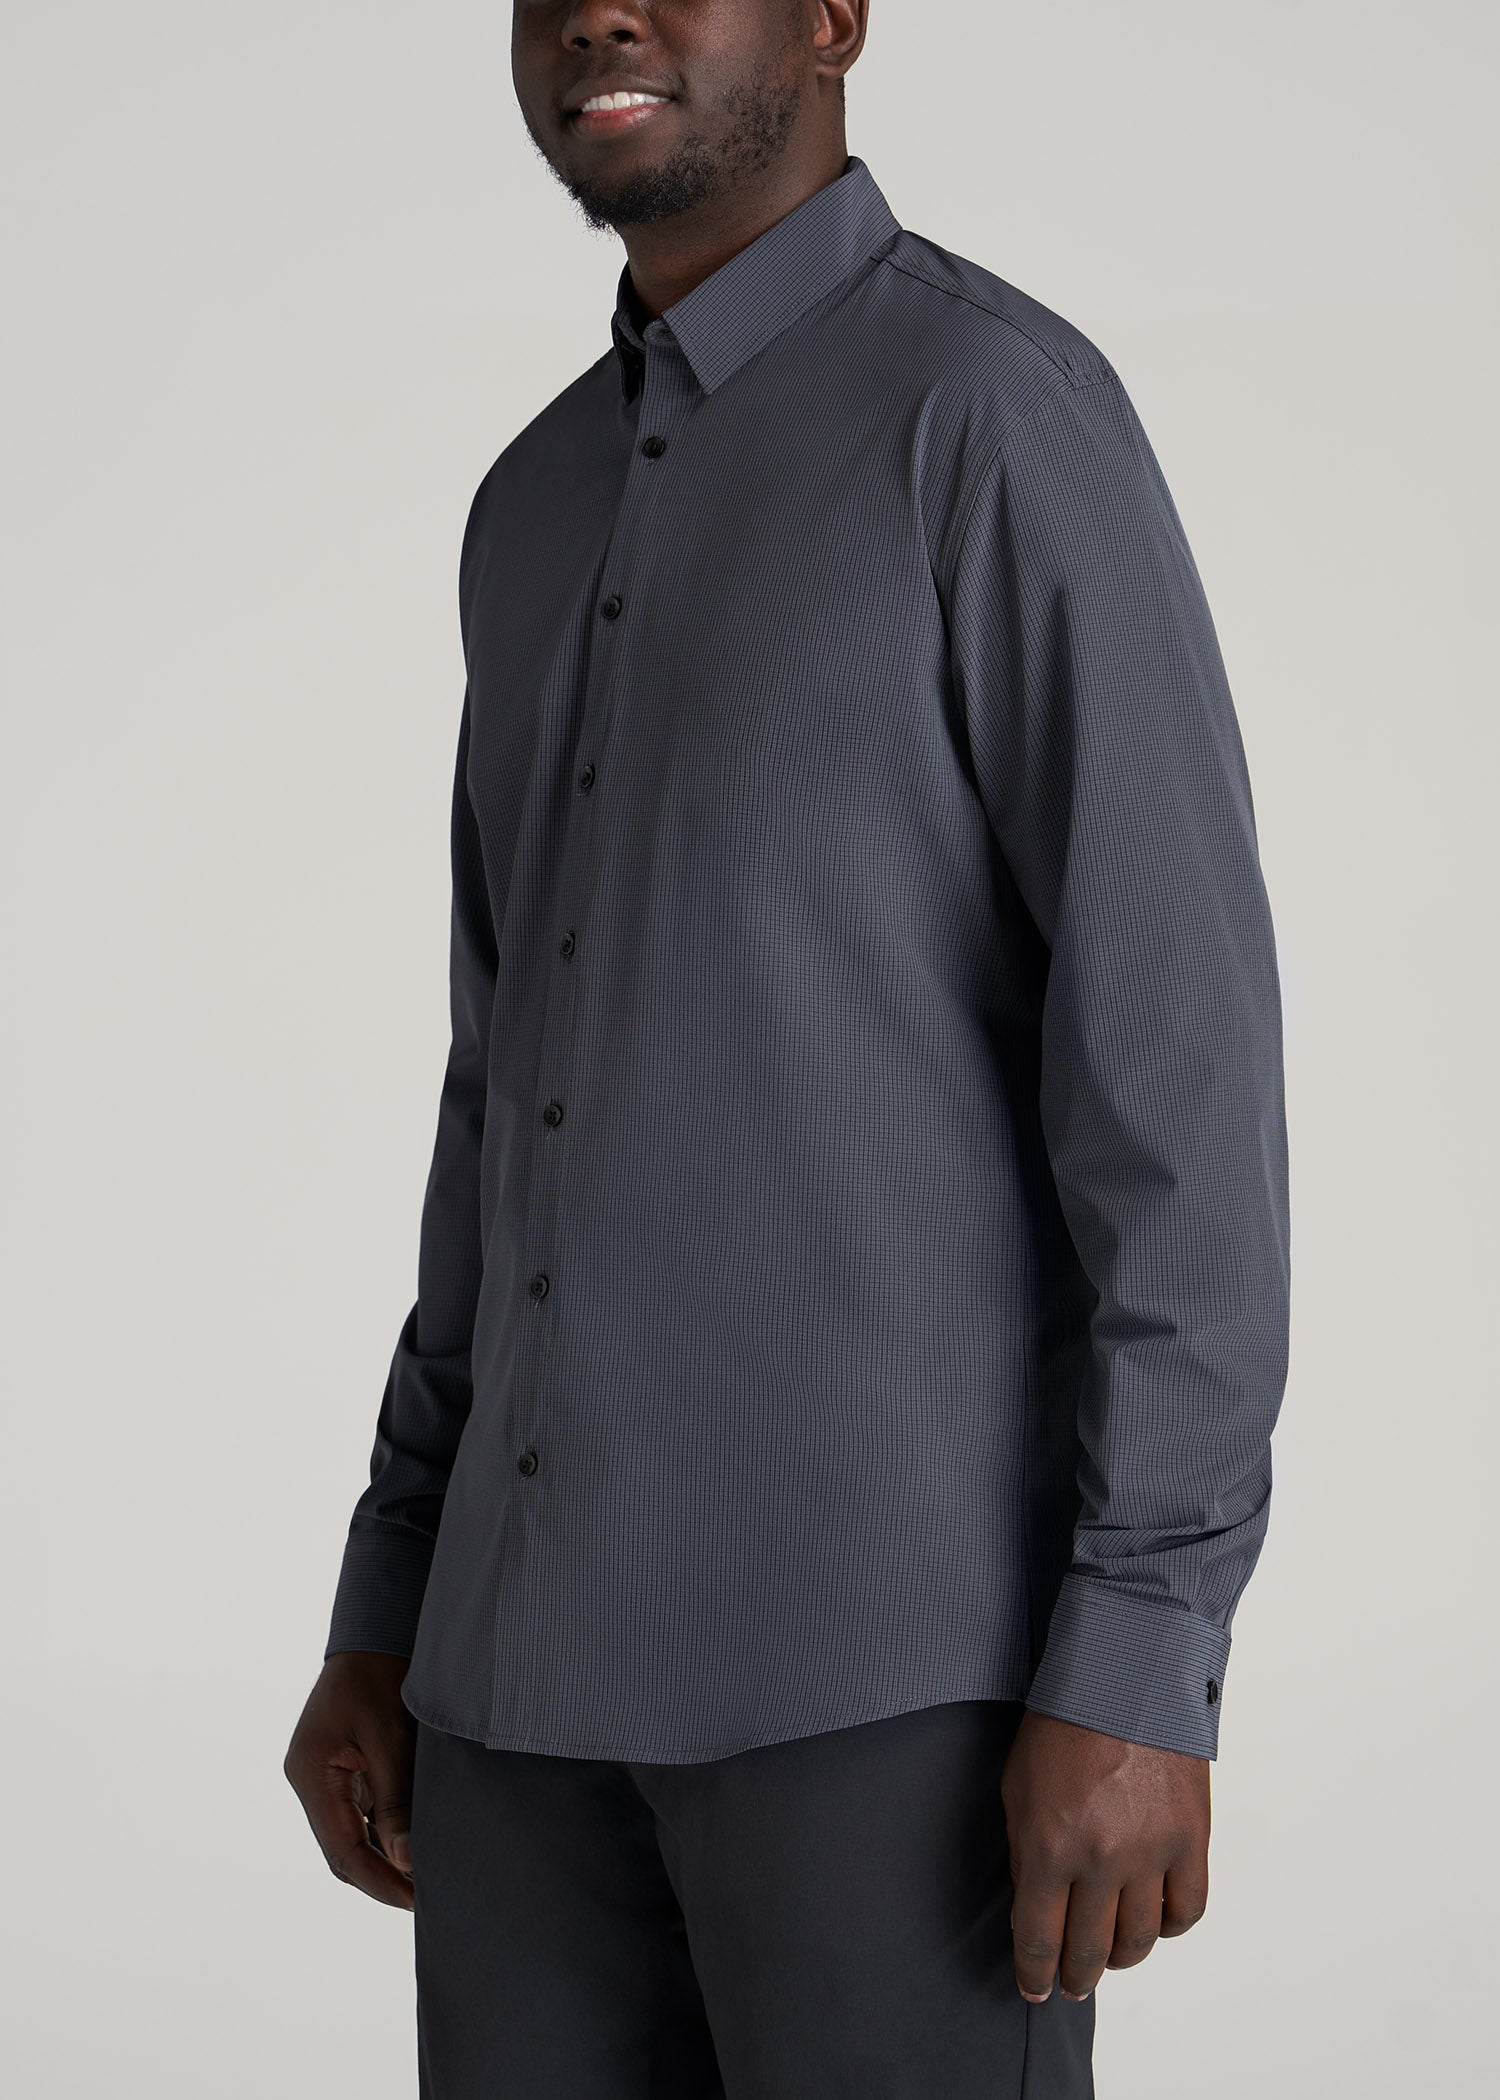 Traveler Stretch Dress Shirt for Tall Men in Charcoal Micro Check